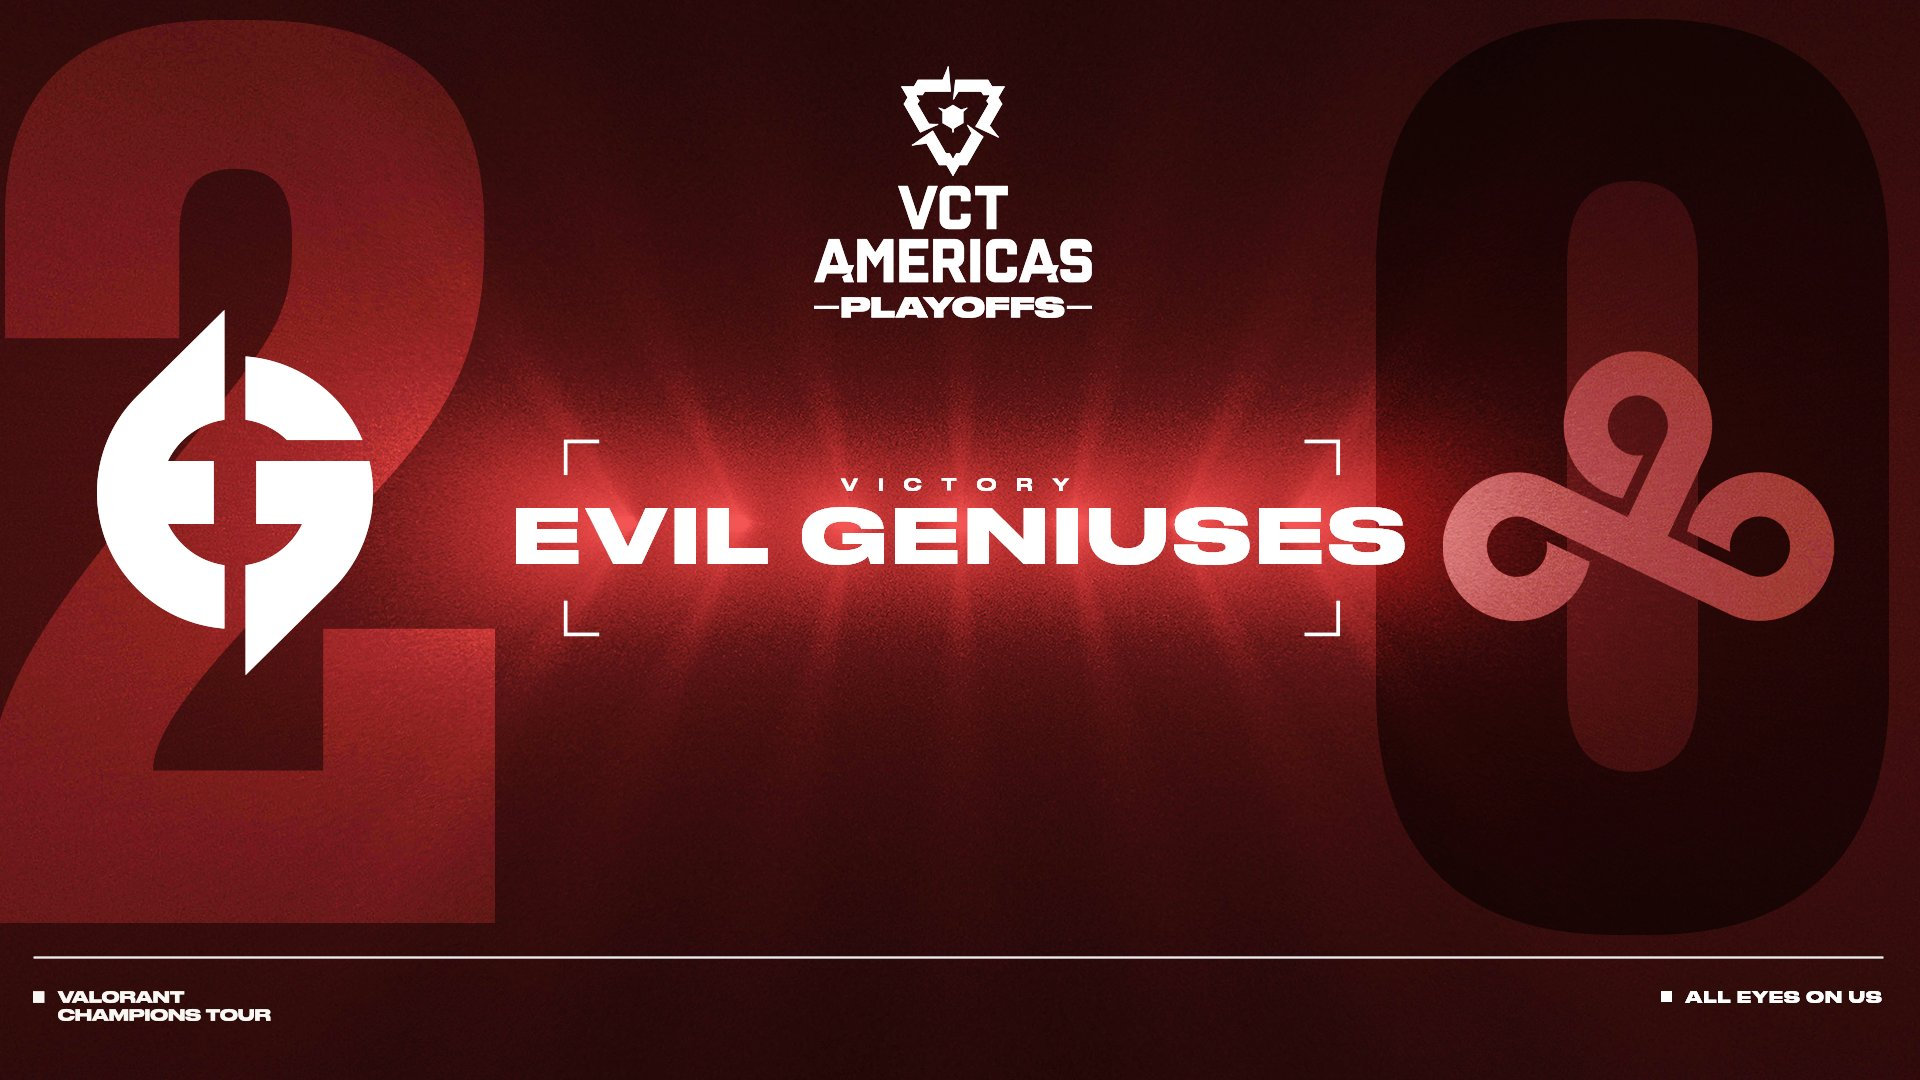 What does Evil Genuises think about FPX? 🤨 #valorant #vct #evilgenius